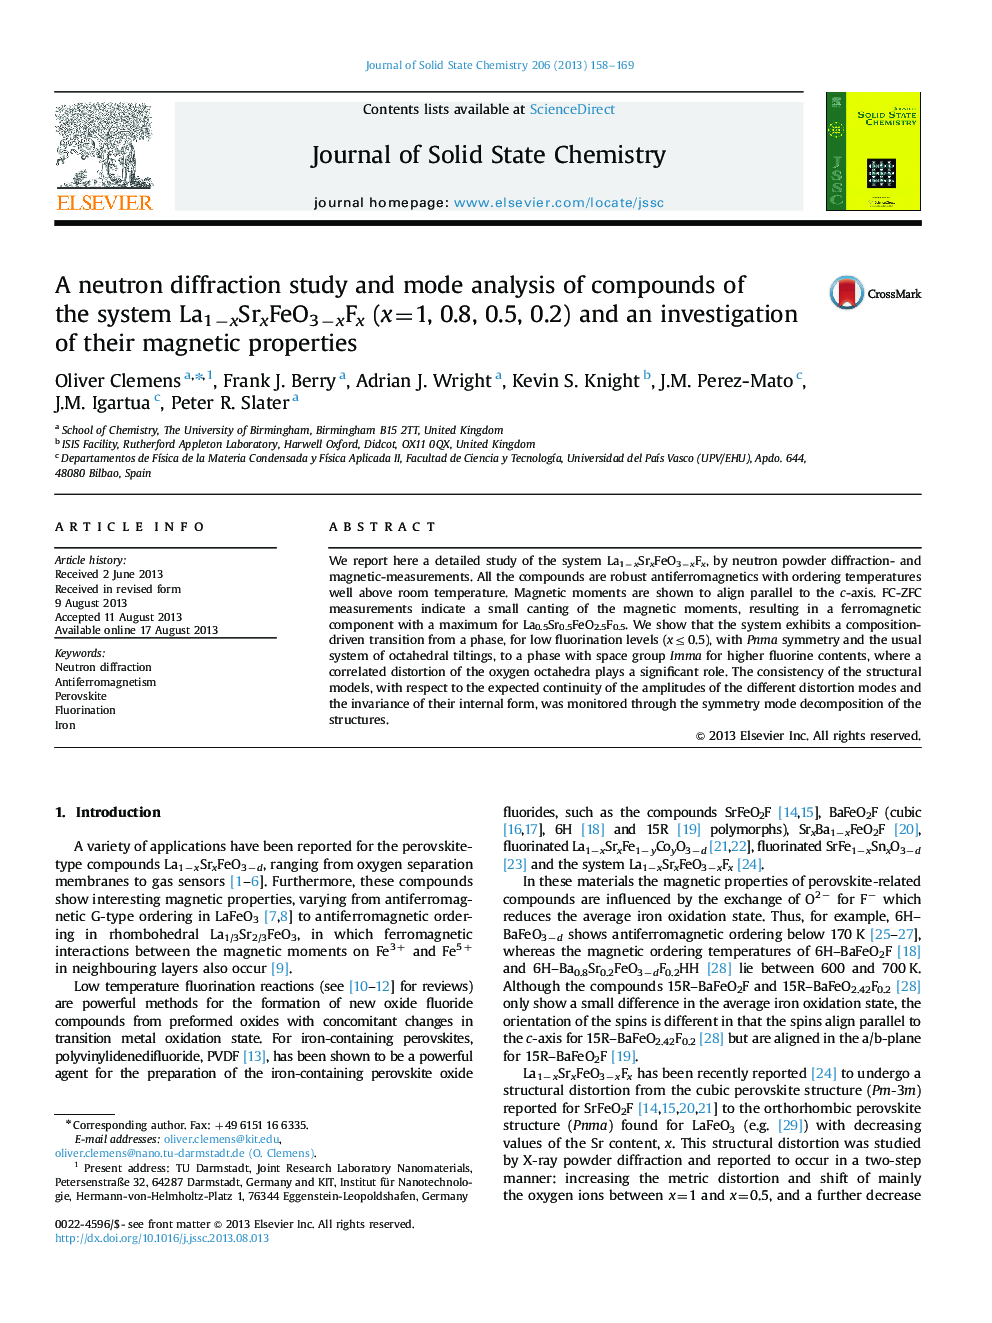 A neutron diffraction study and mode analysis of compounds of the system La1âxSrxFeO3âxFx (x=1, 0.8, 0.5, 0.2) and an investigation of their magnetic properties